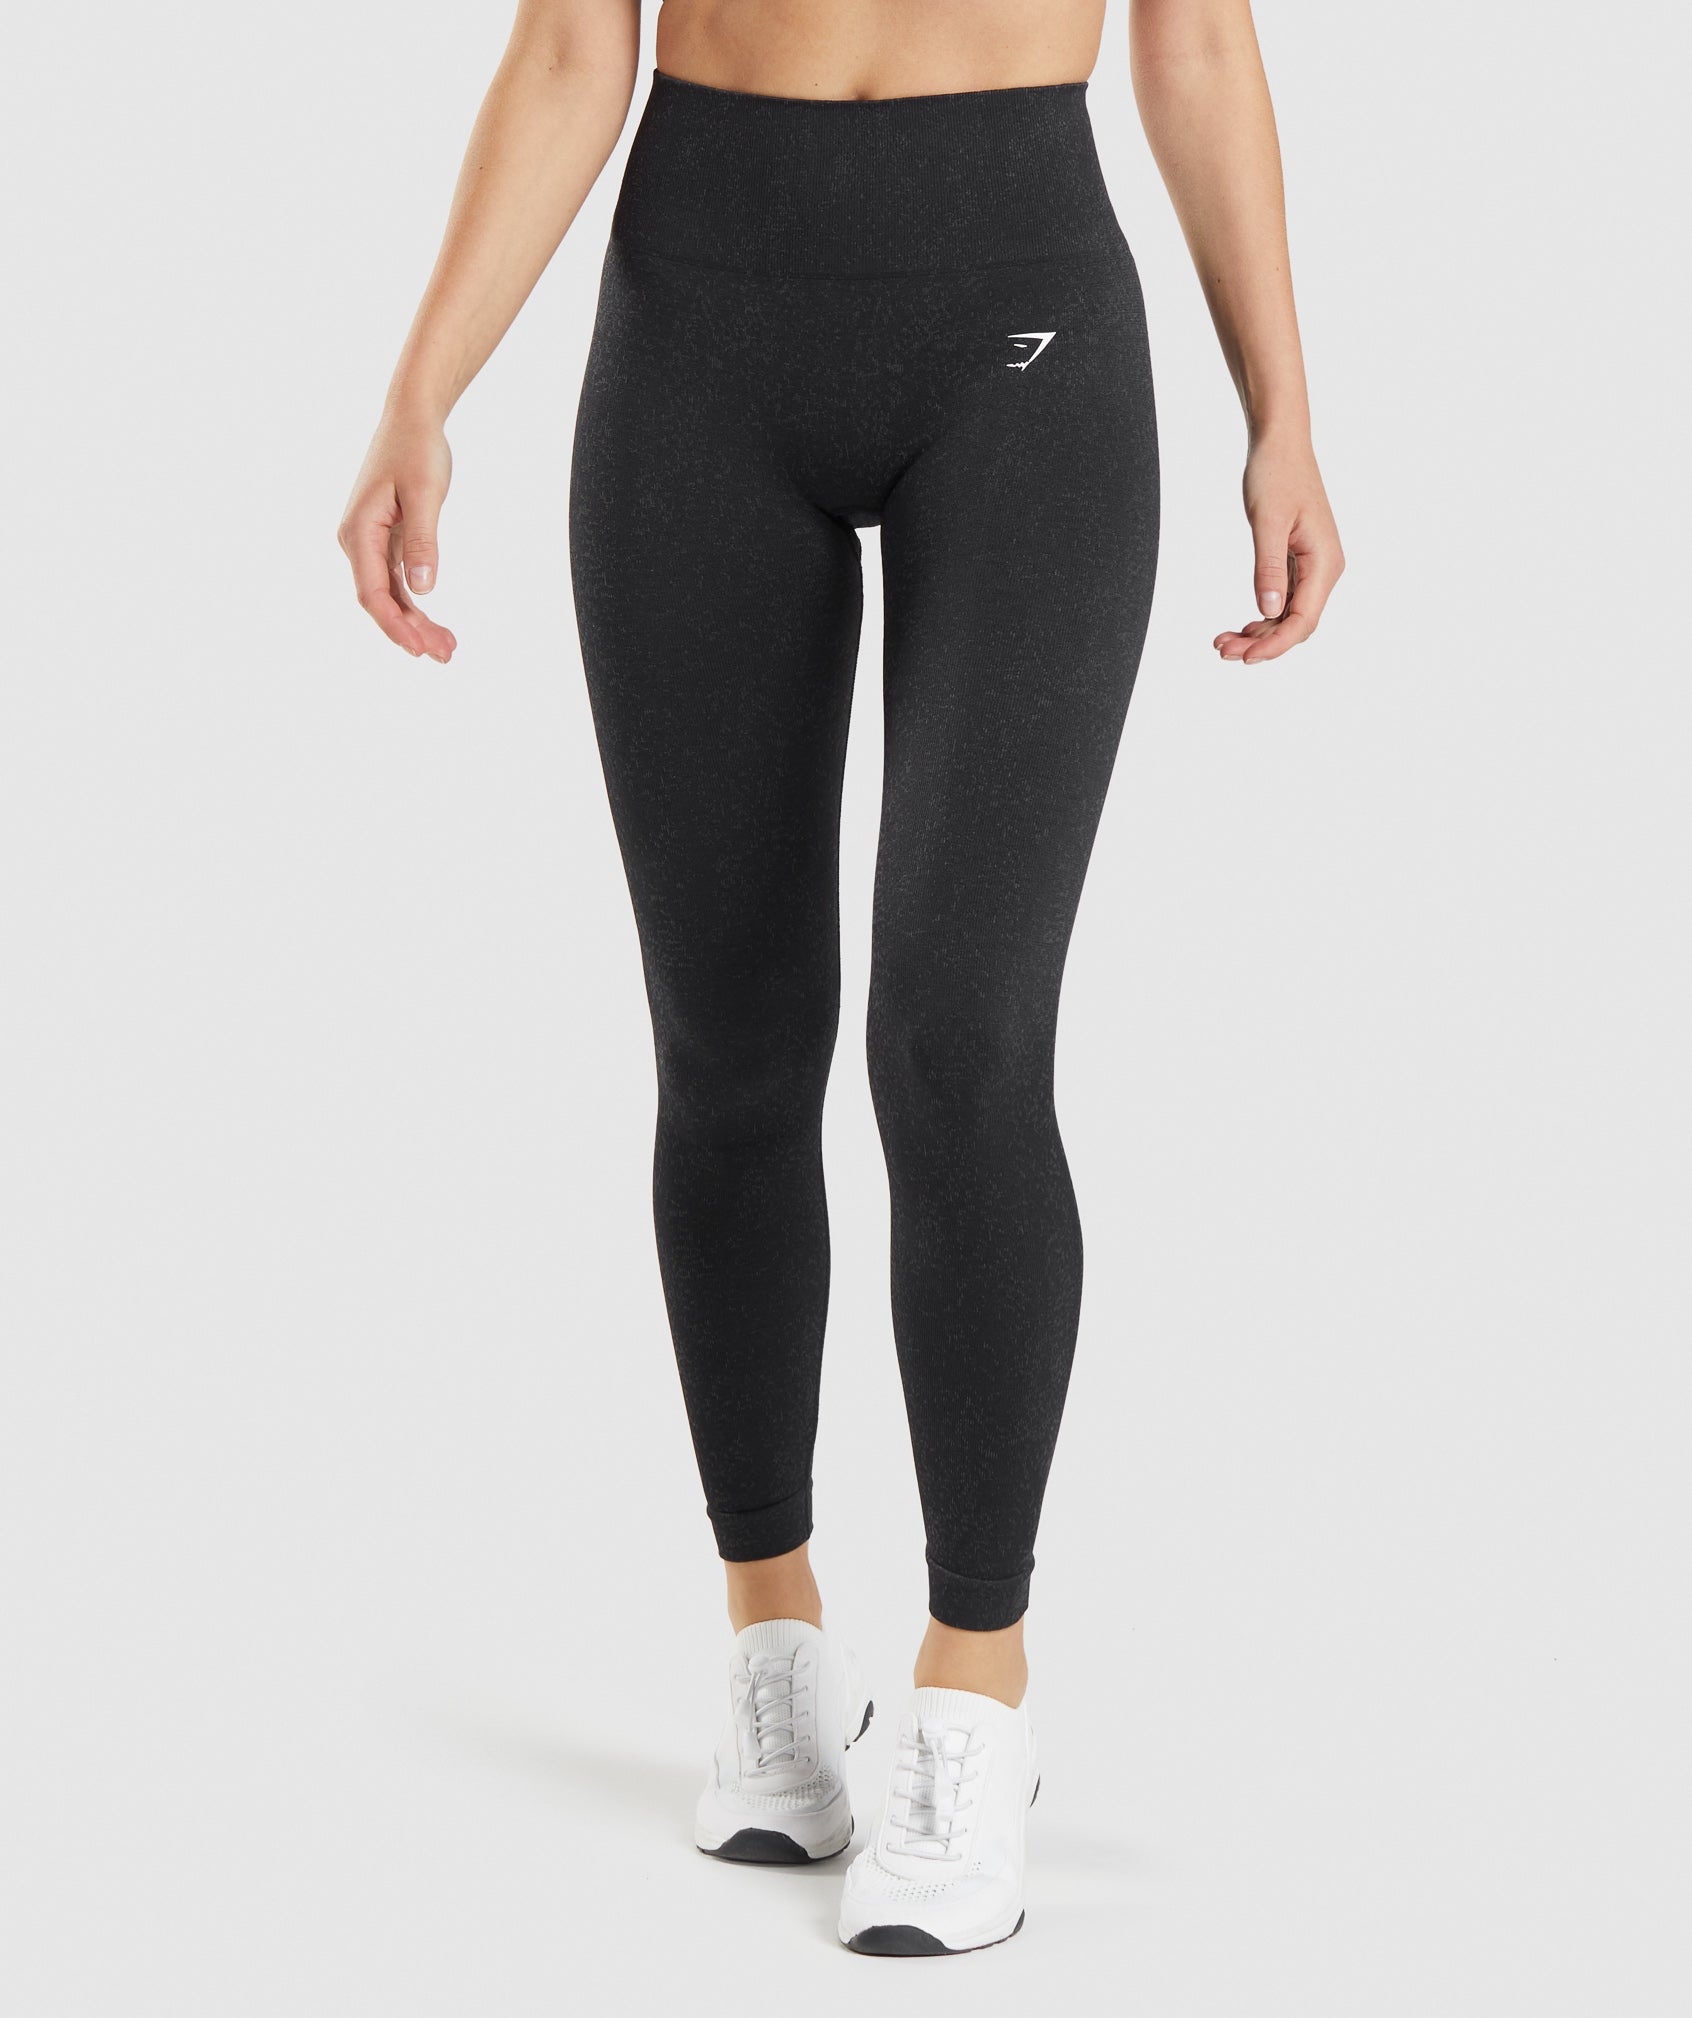 Gymshark Adapt Ombre Seamless Leggings in Blue Marl (S), Women's Fashion,  Activewear on Carousell